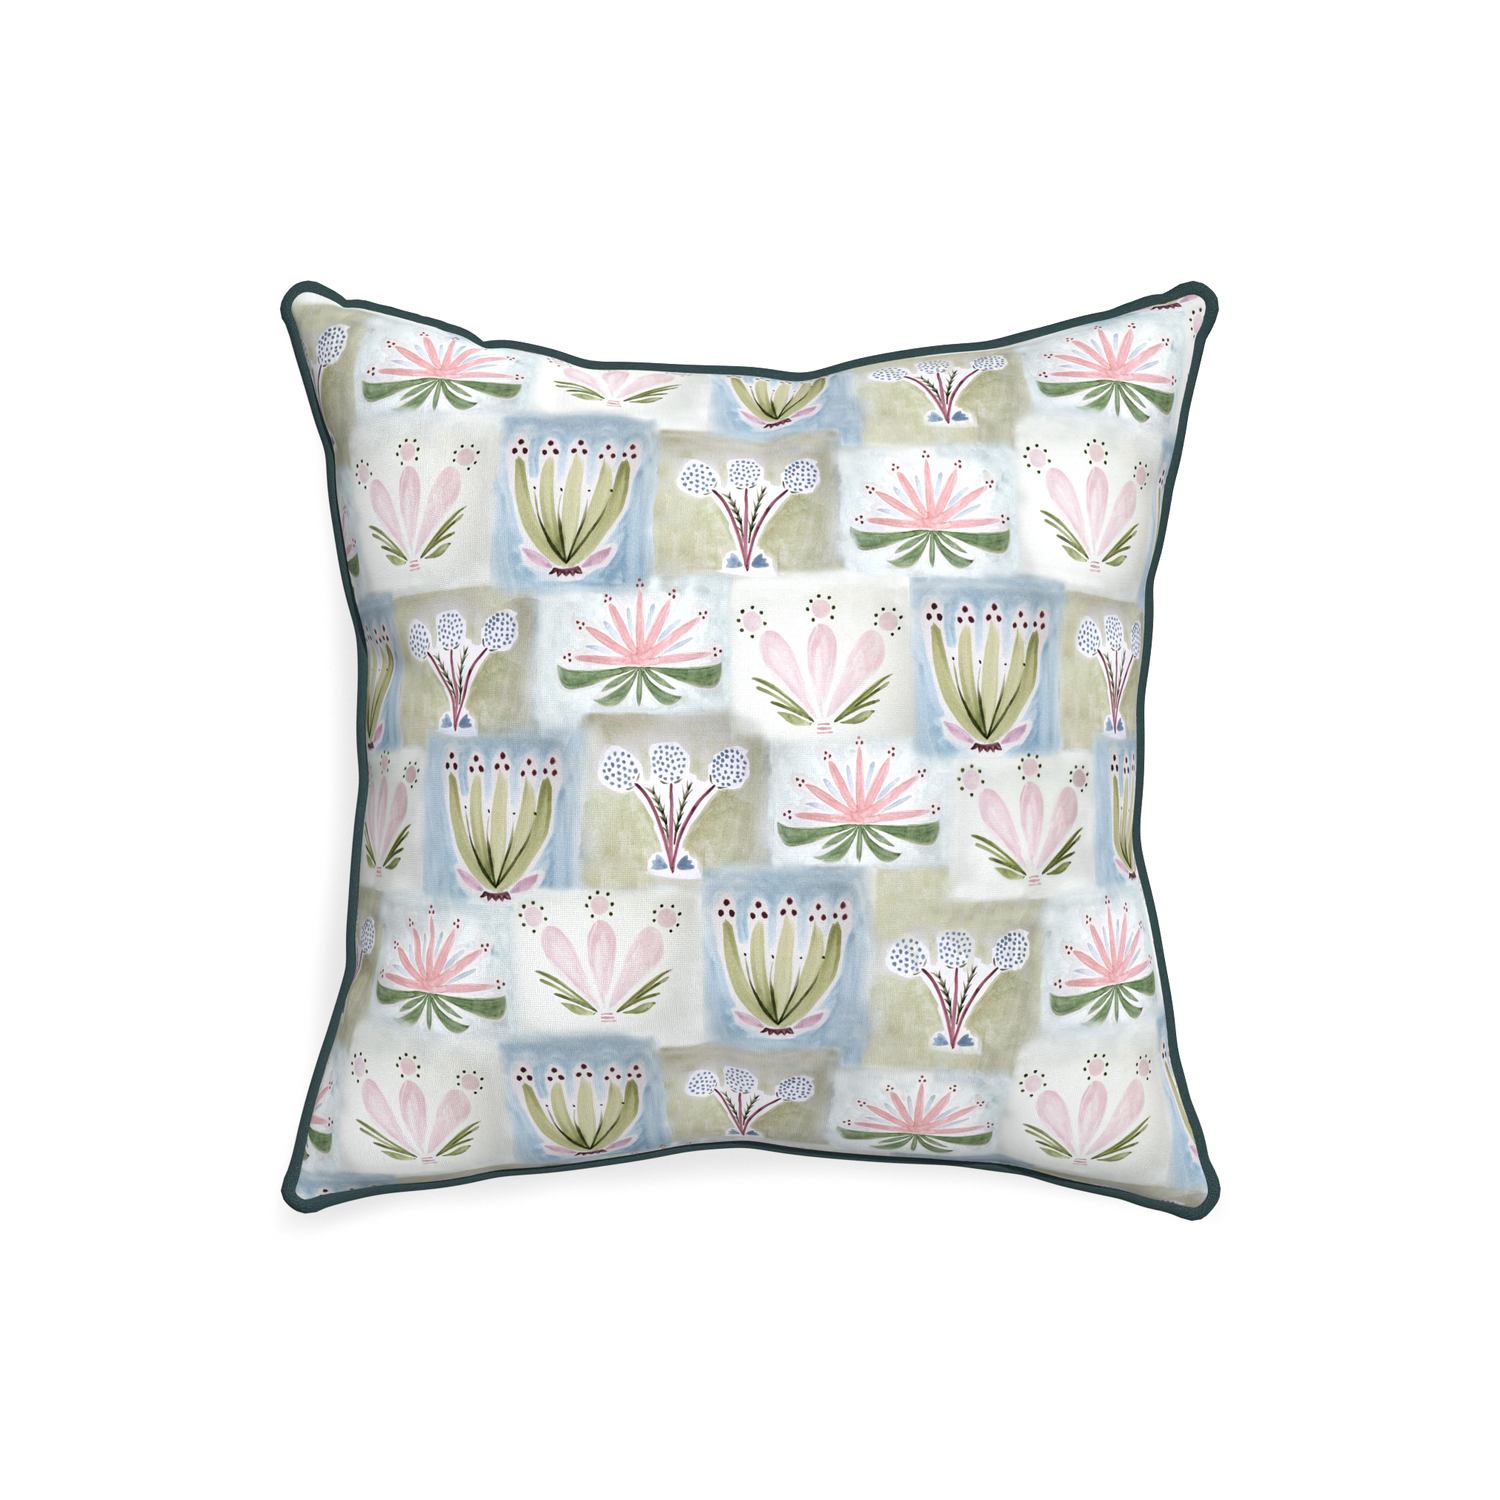 20-square harper custom hand-painted floralpillow with p piping on white background